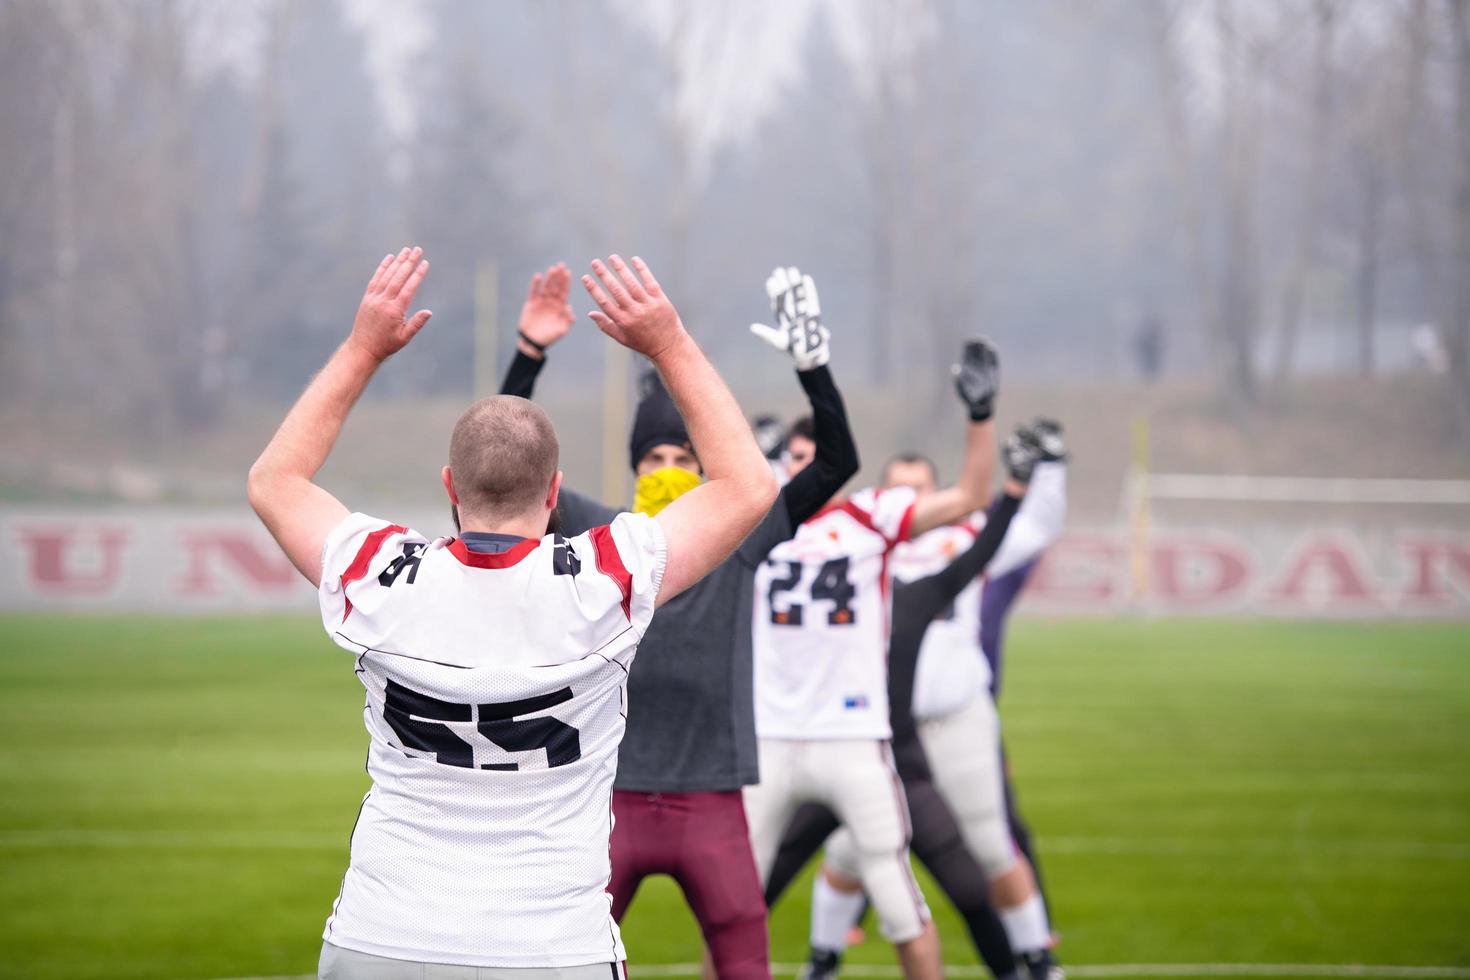 american football players stretching and warming up photo